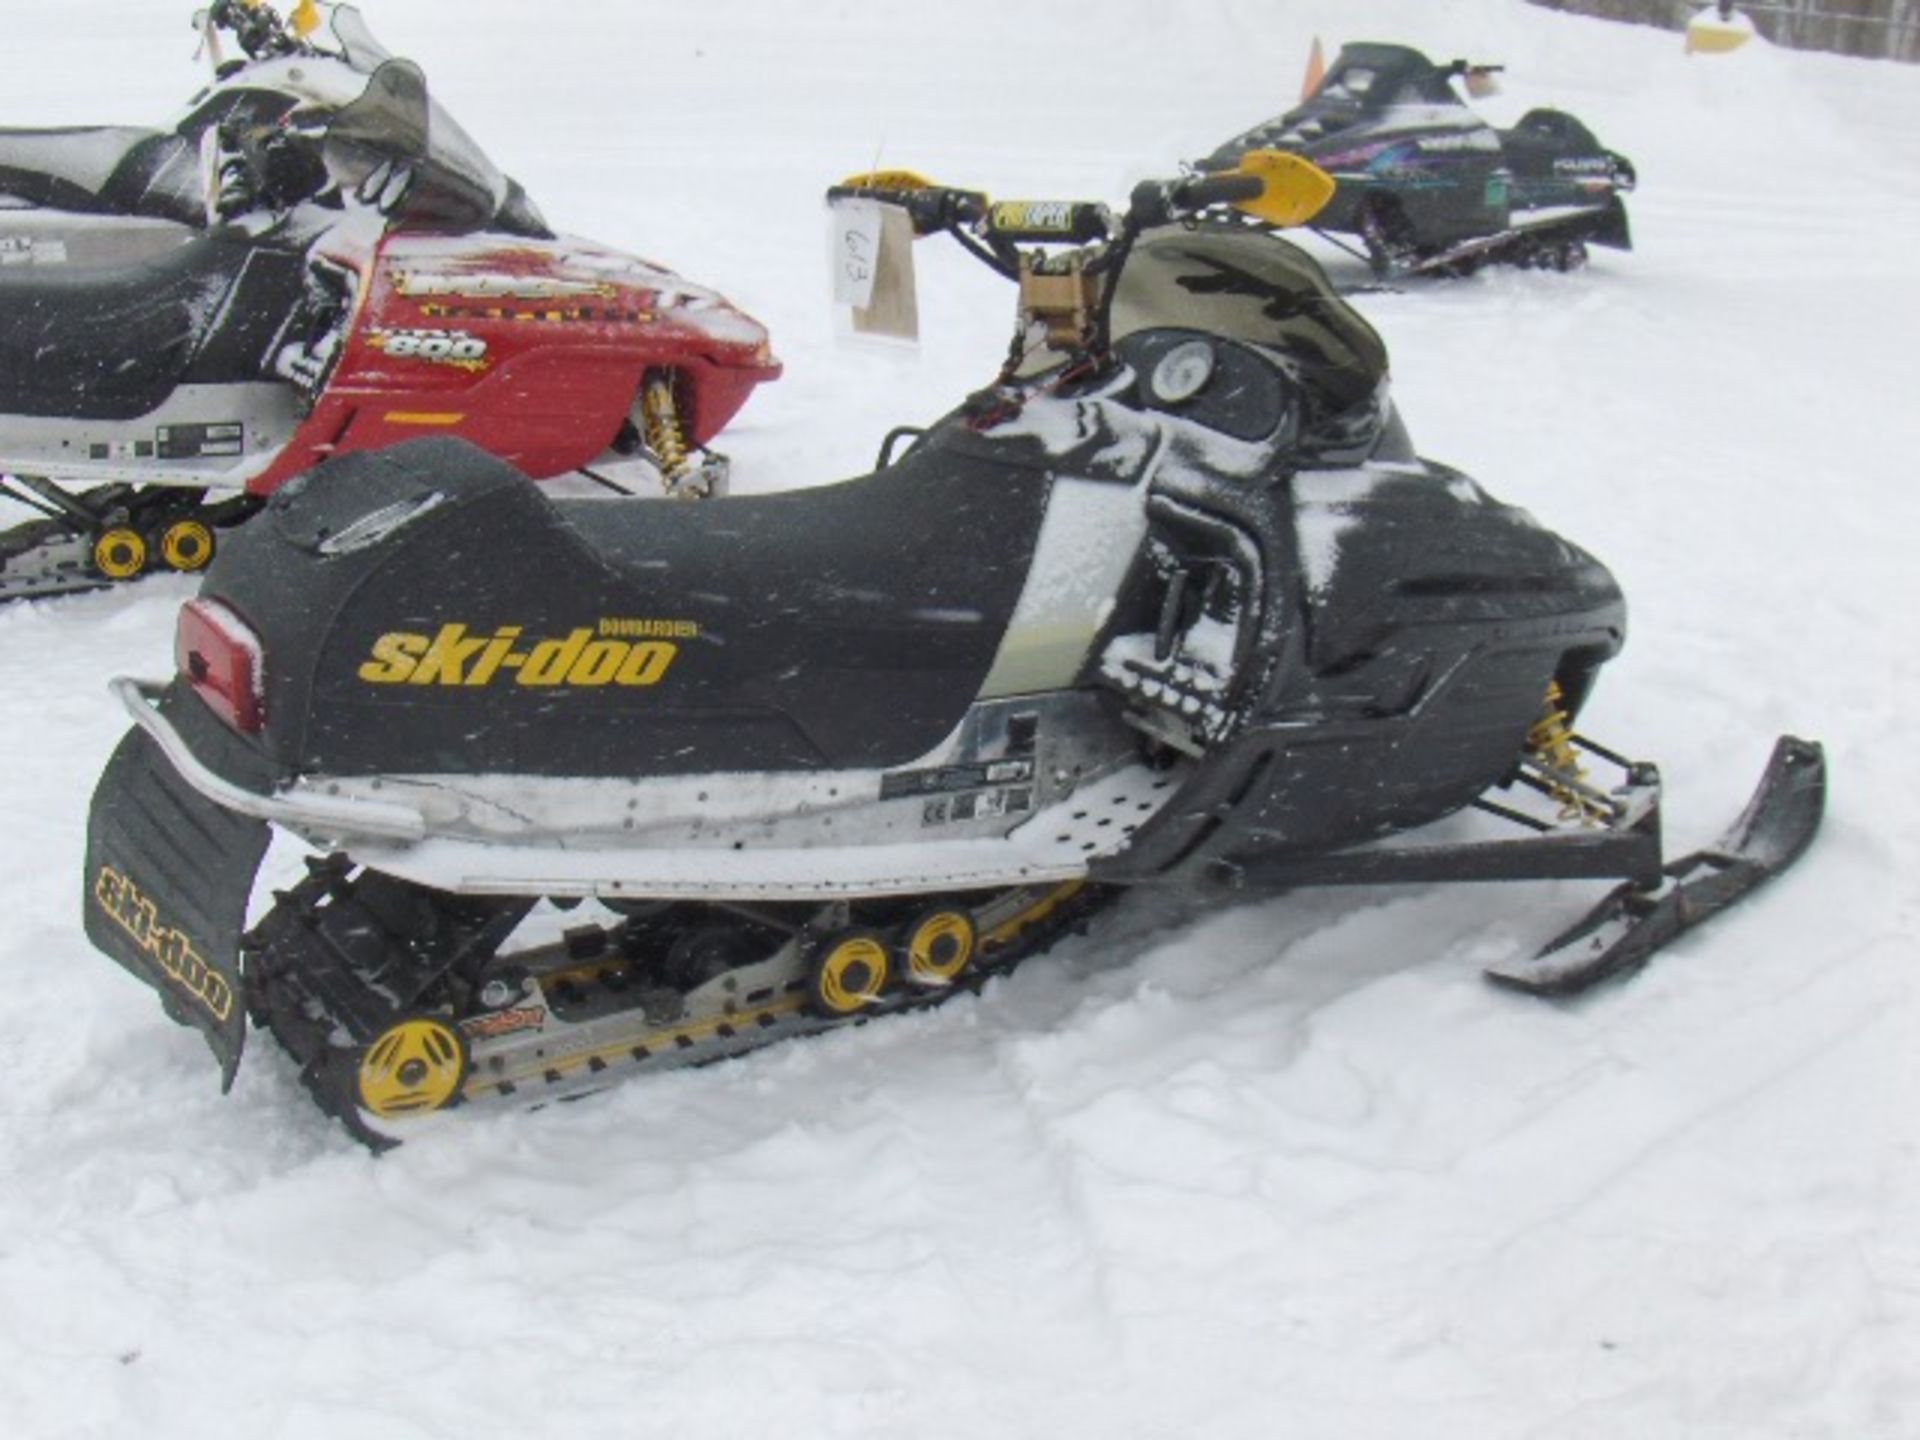 2000 SKI DOO 600 MXZ  2BPS16228YV000117 snowmobile, Ripsaw with dyno port pipe upgrade/suspension - Image 3 of 4